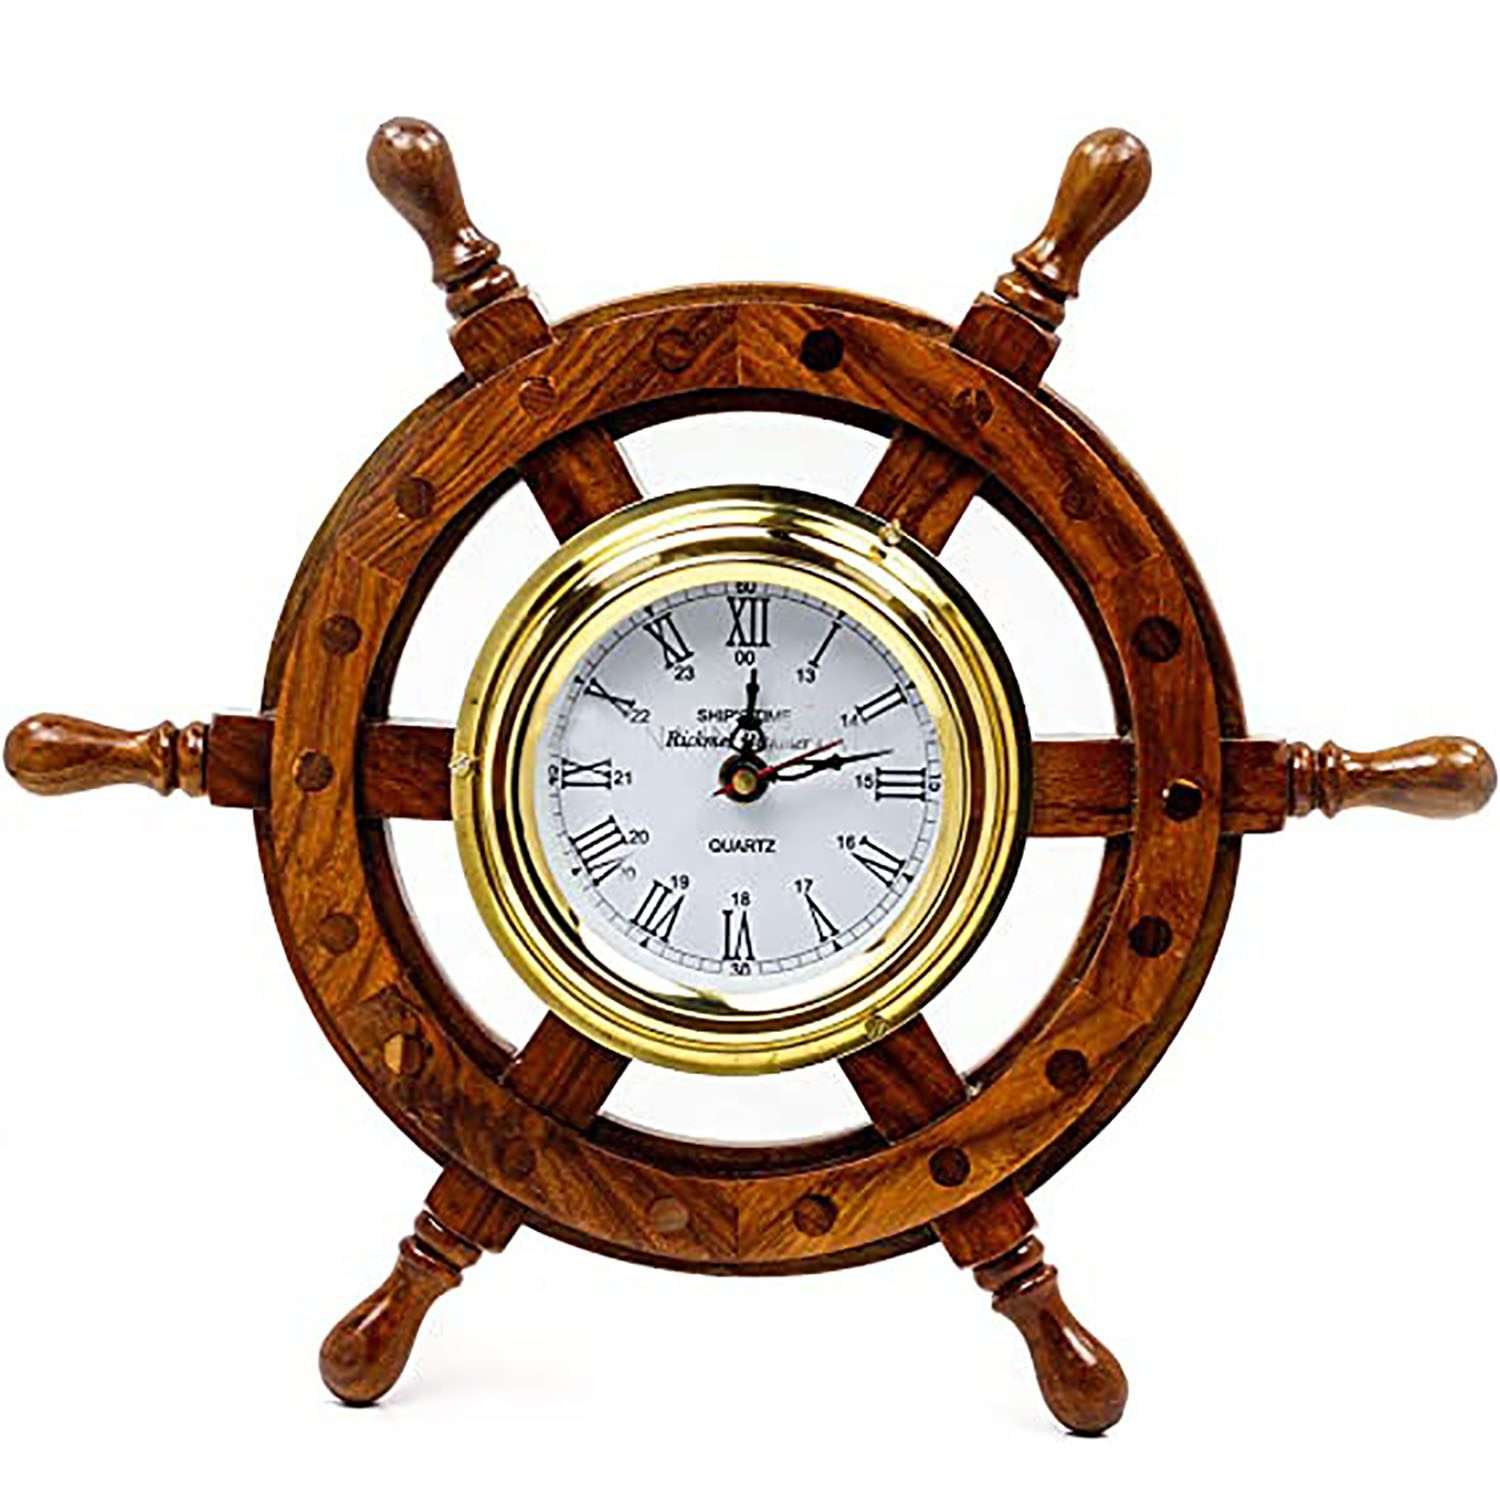 Wooden Crafted Ship Wheel Nautical Brass Wall Clock | Vintage Wall Clock for Home Décor